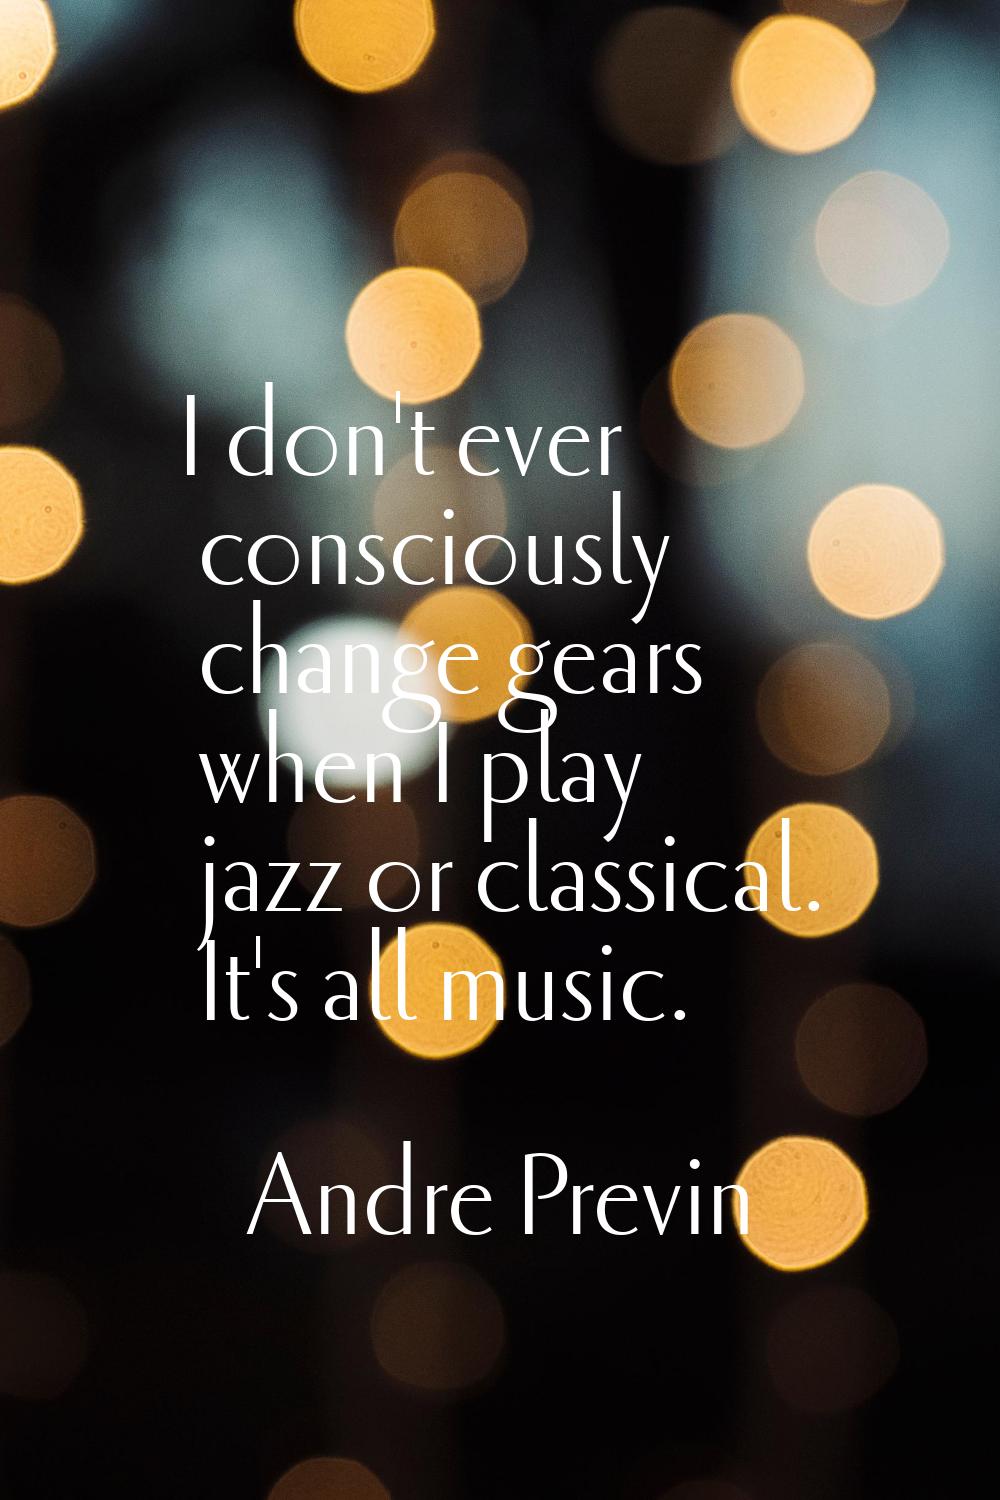 I don't ever consciously change gears when I play jazz or classical. It's all music.